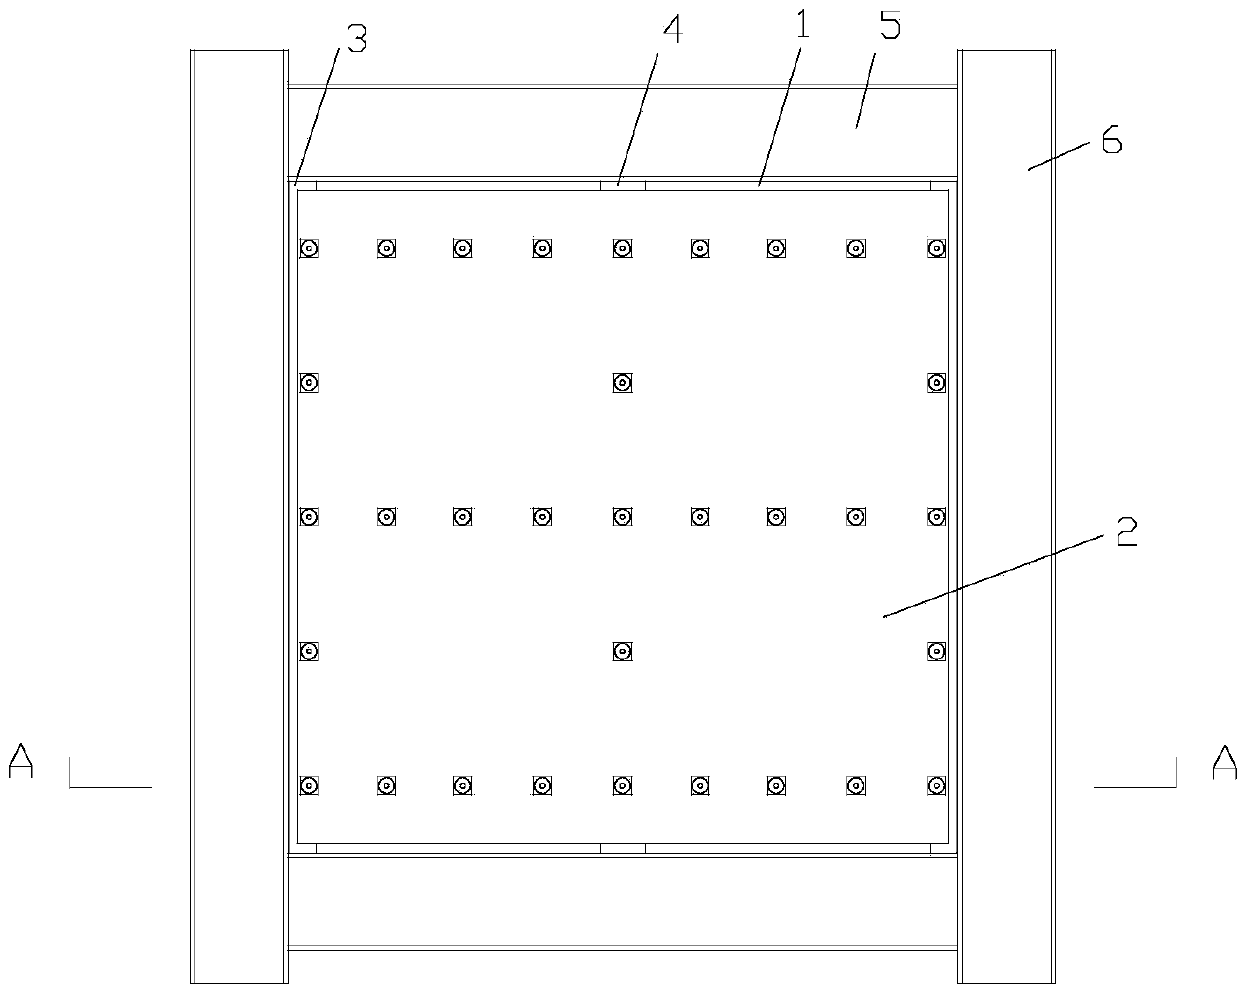 Buckling constraint steel plate shear wall capable of being used as vertical bearing component